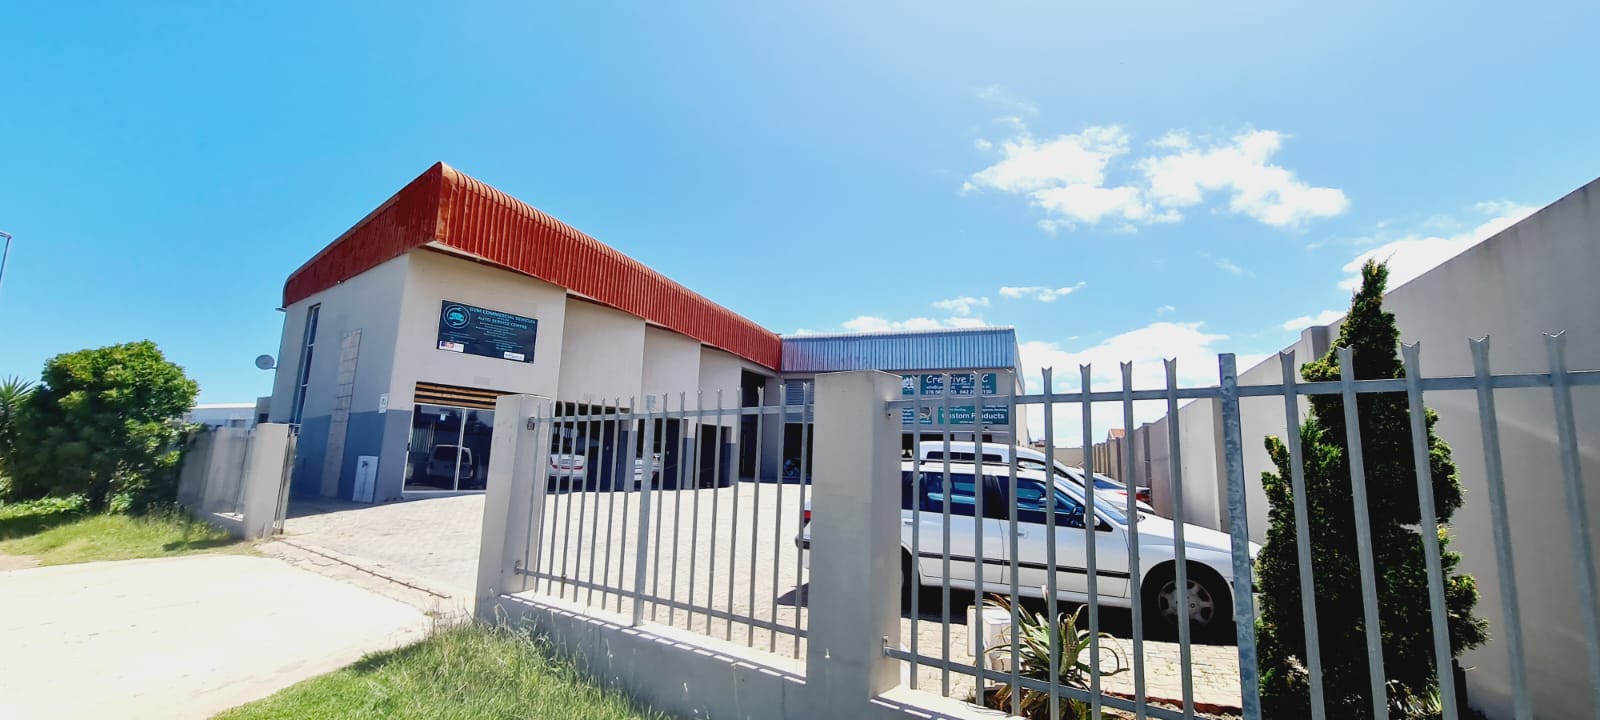 Commercial Property for sale , Fountains Estate, Jeffreys Bay